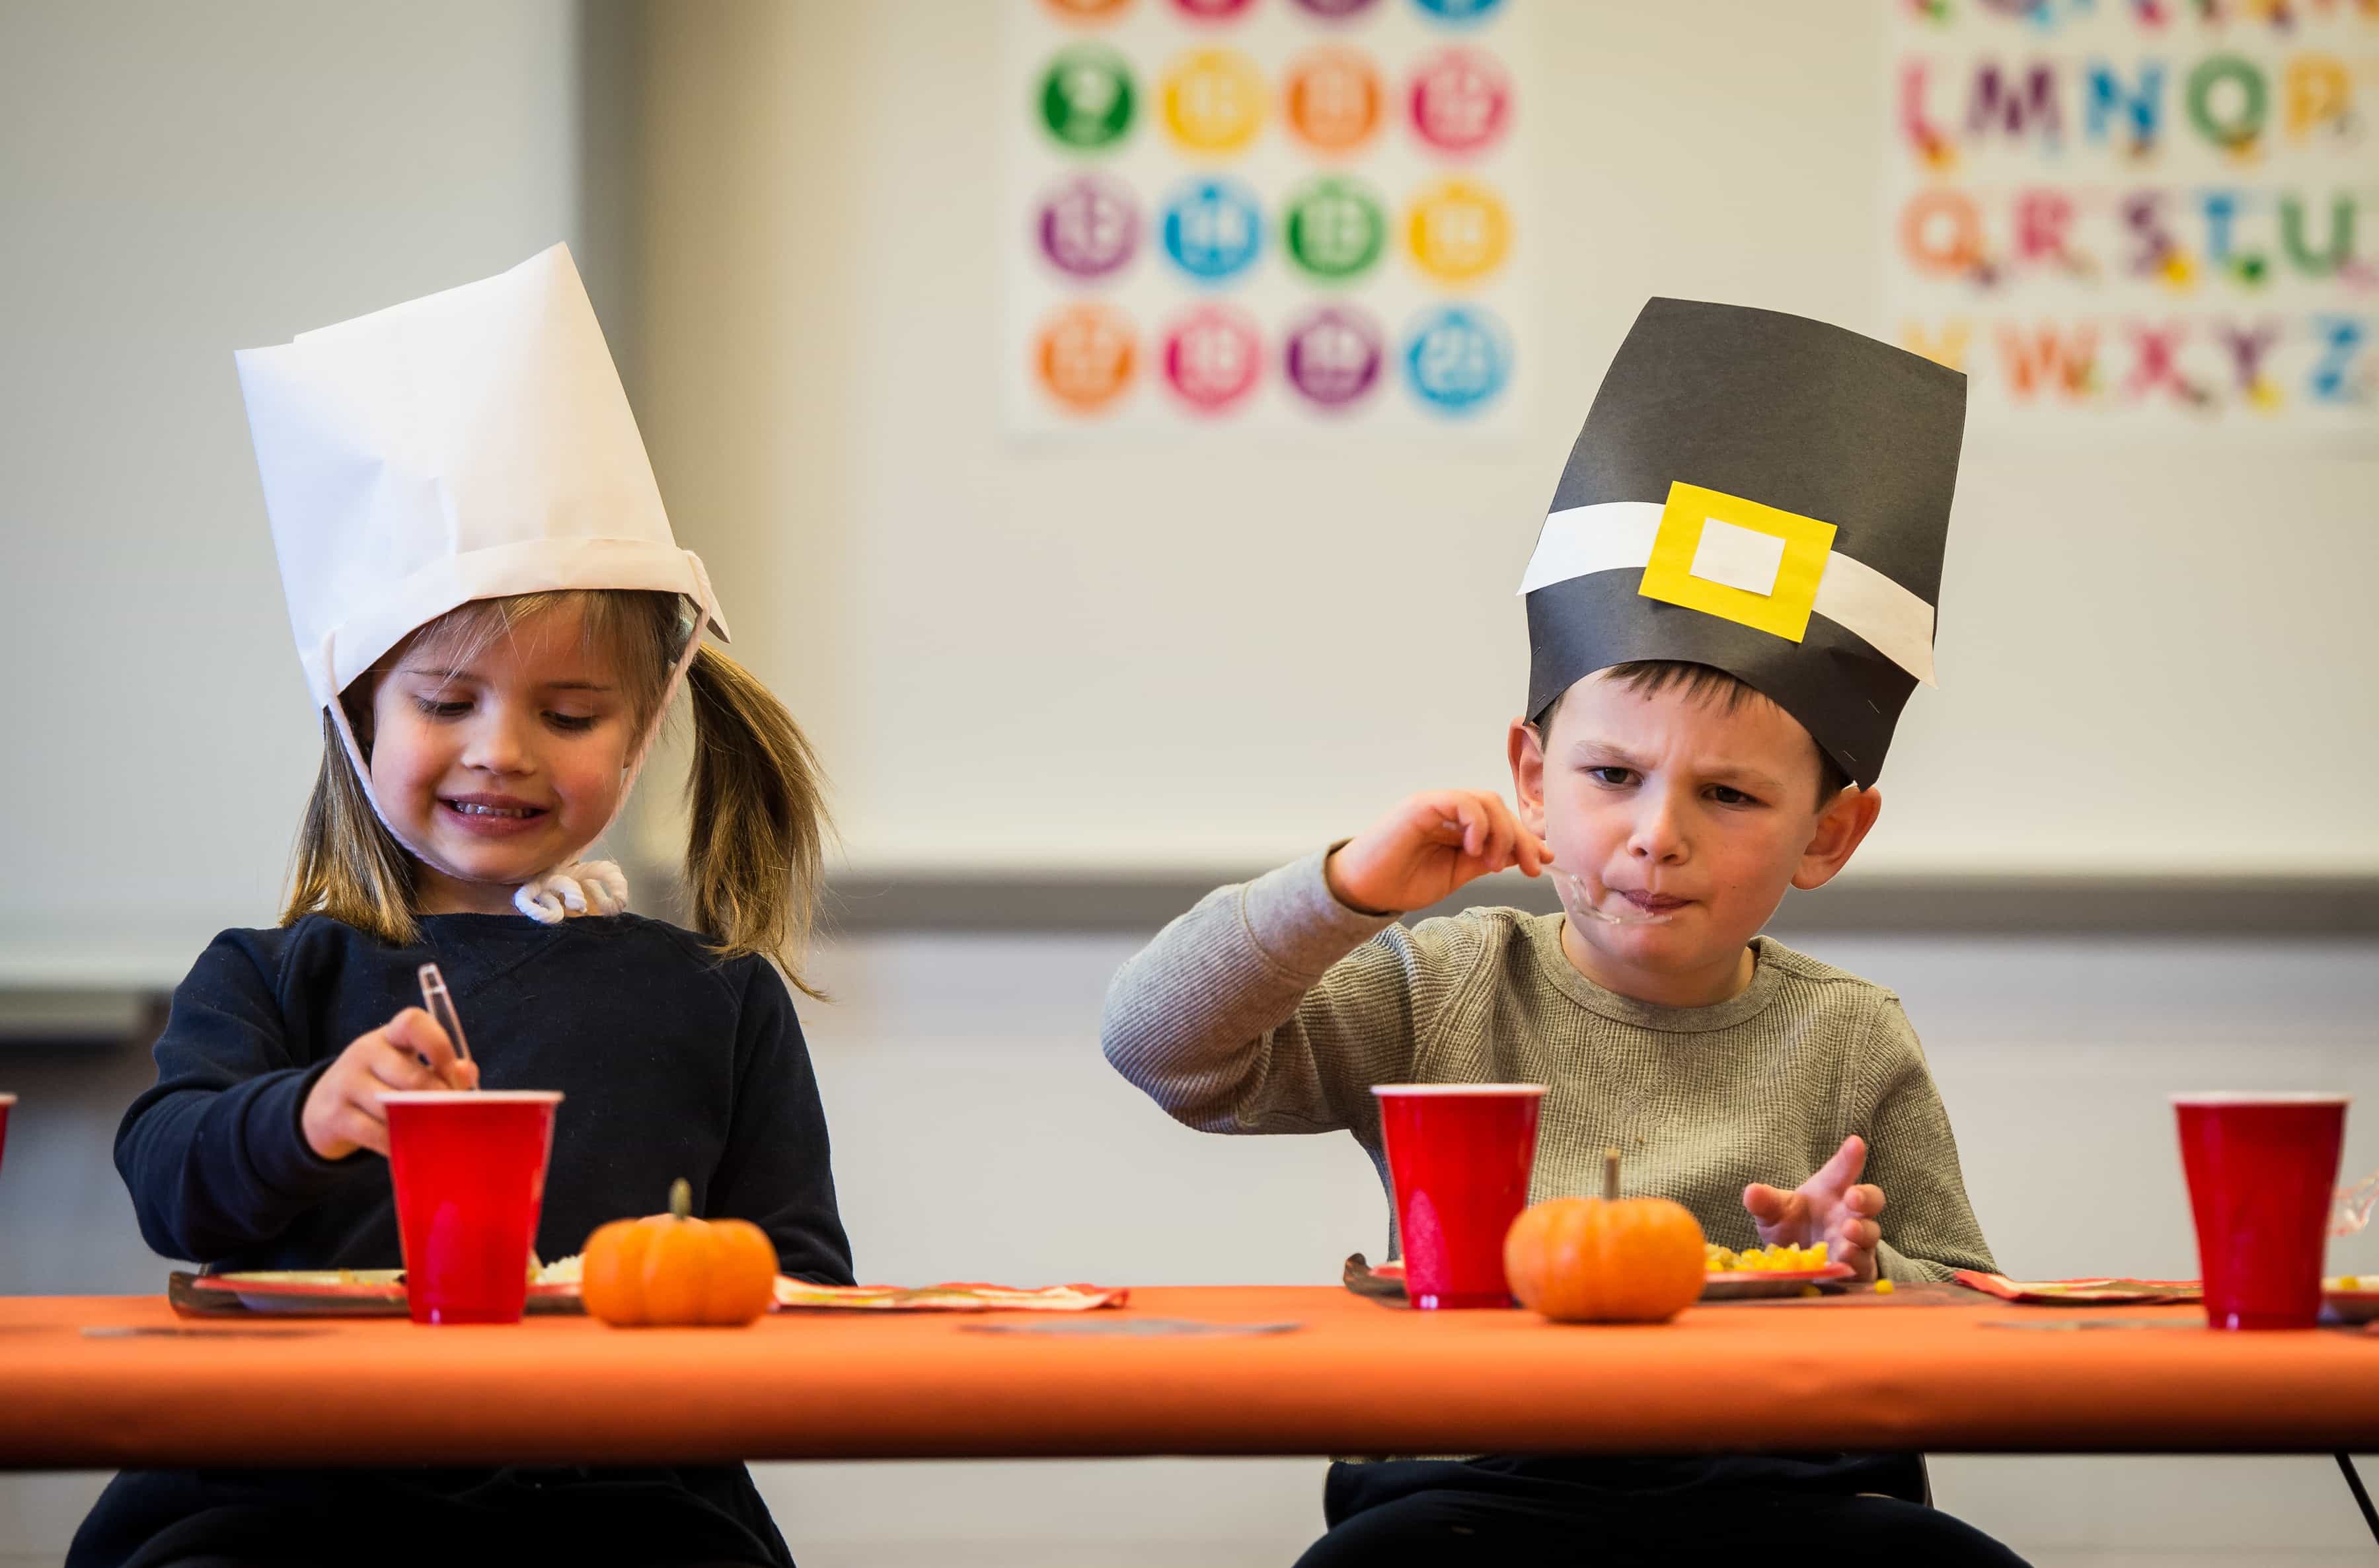 Thanksgiving: Time to Ditch the Pilgrim Hats